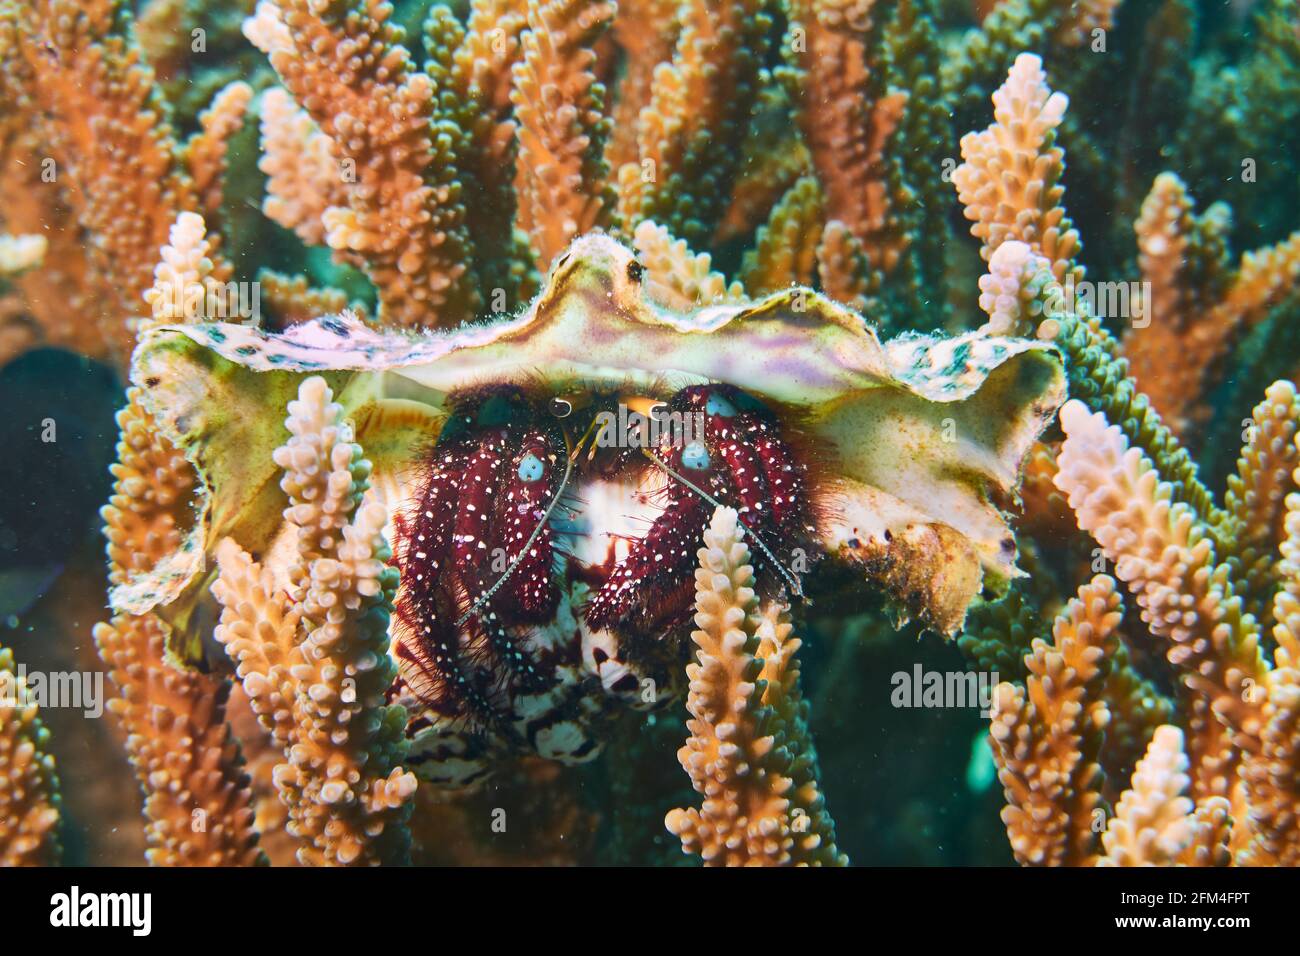 Hermit Crab With Snail Shell In Hard Coral. Selayar, South Sulawesi, Indonesia Stock Photo